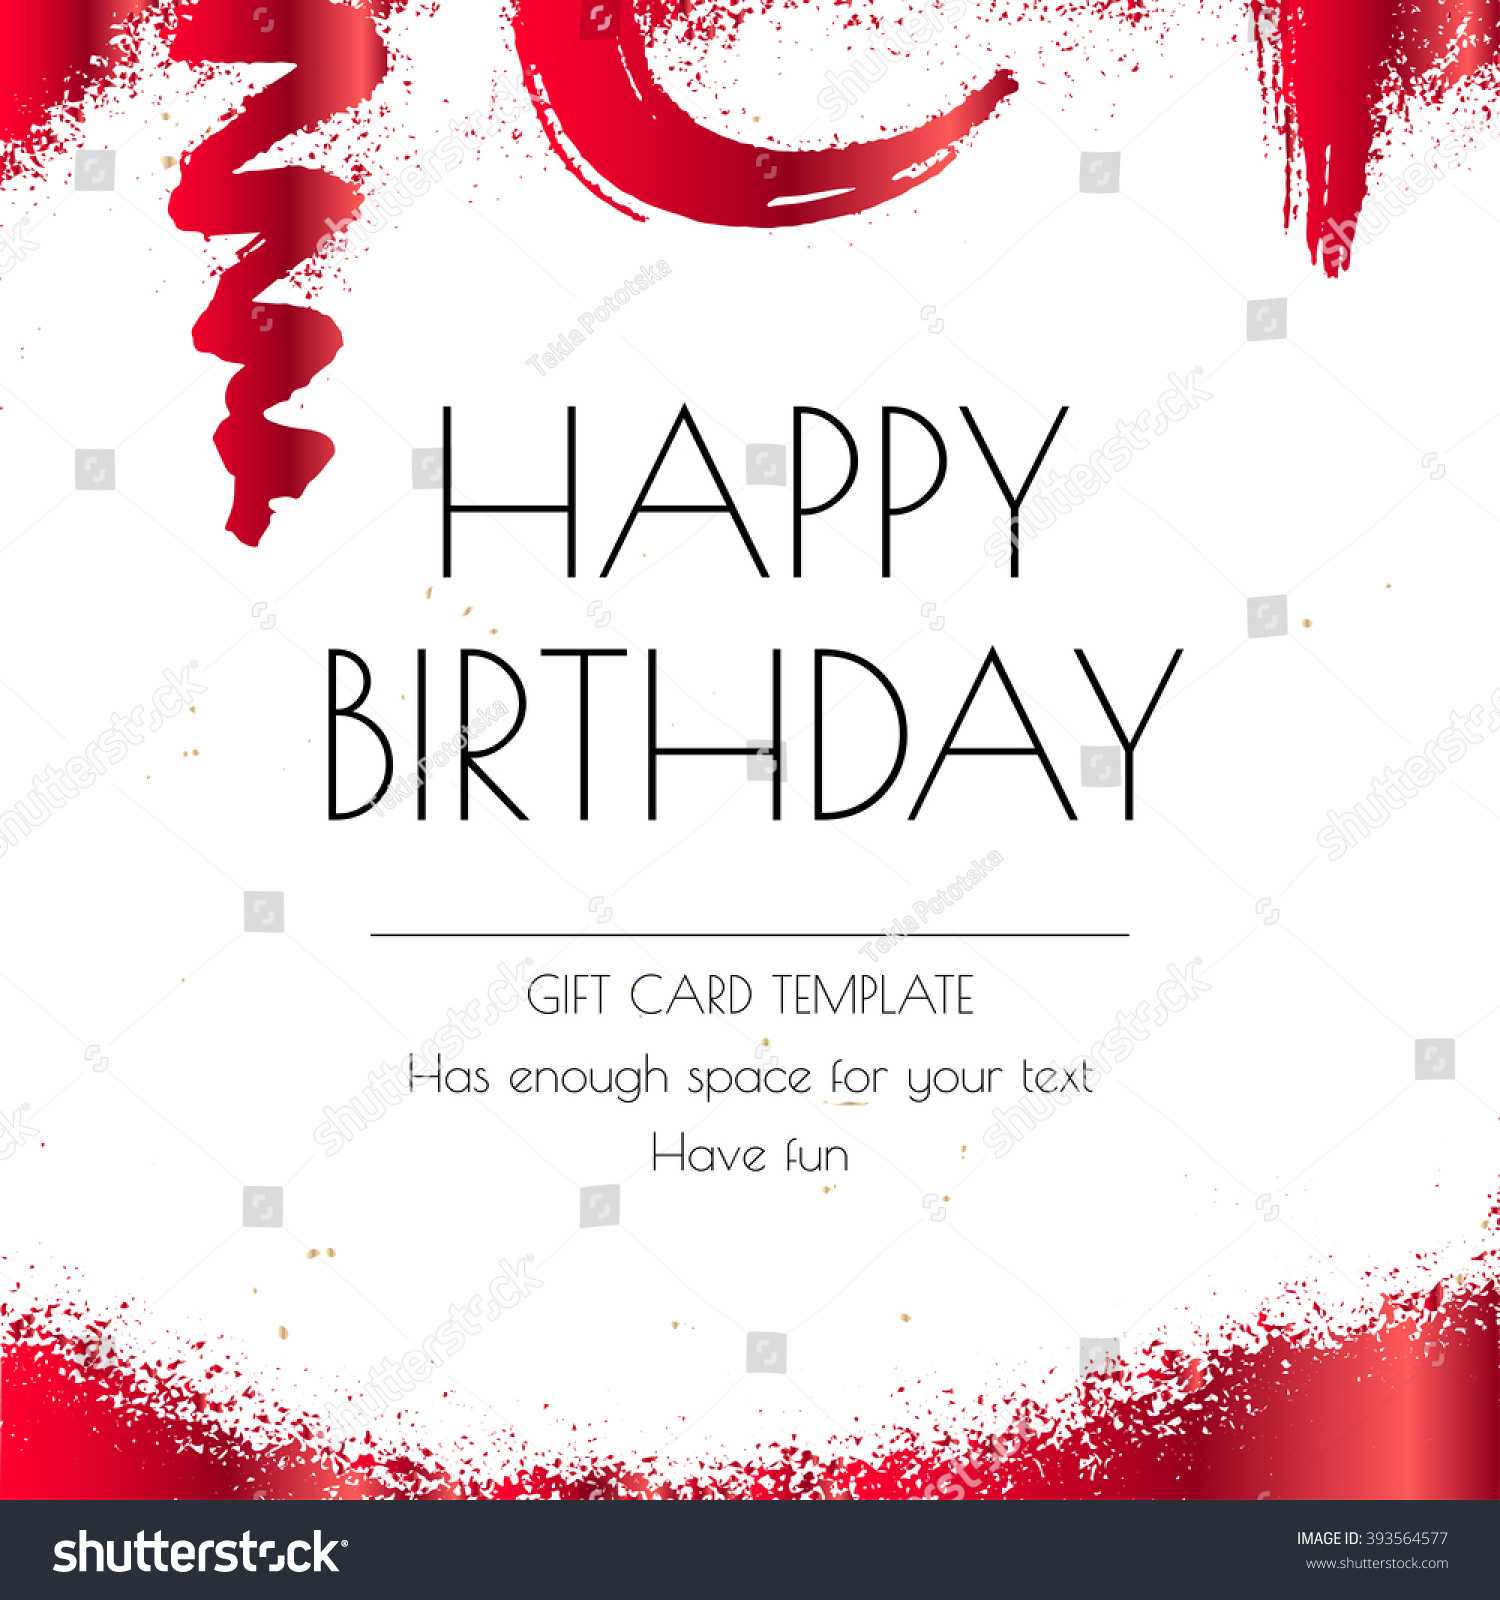 Thank You Card Indesign Template ] – Weekly Calendar Pertaining To Birthday Card Indesign Template